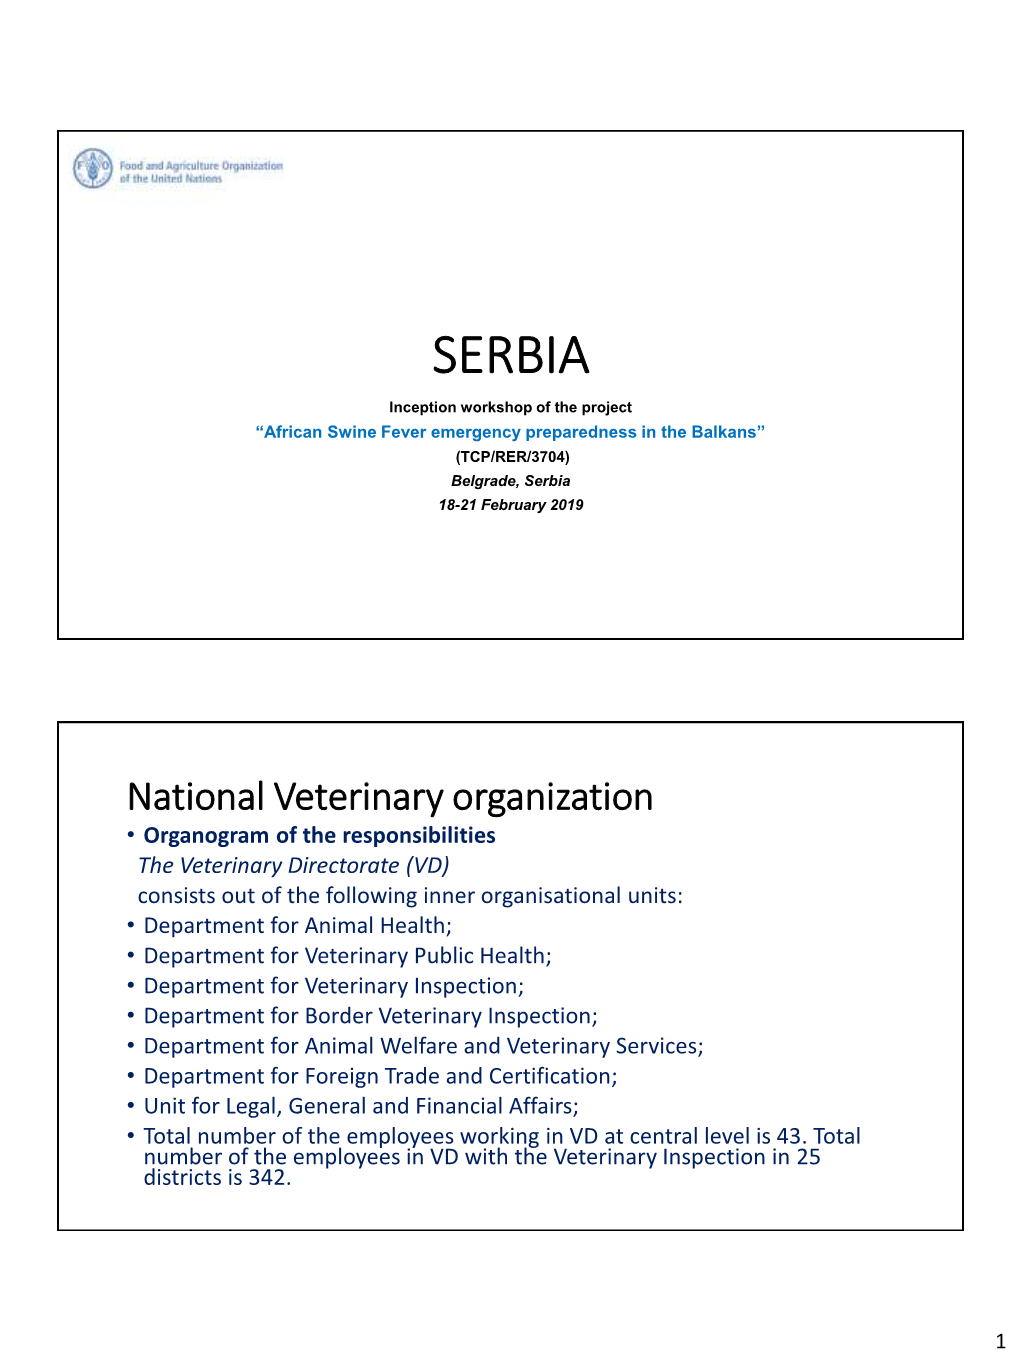 SERBIA Inception Workshop of the Project “African Swine Fever Emergency Preparedness in the Balkans” (TCP/RER/3704) Belgrade, Serbia 18-21 February 2019